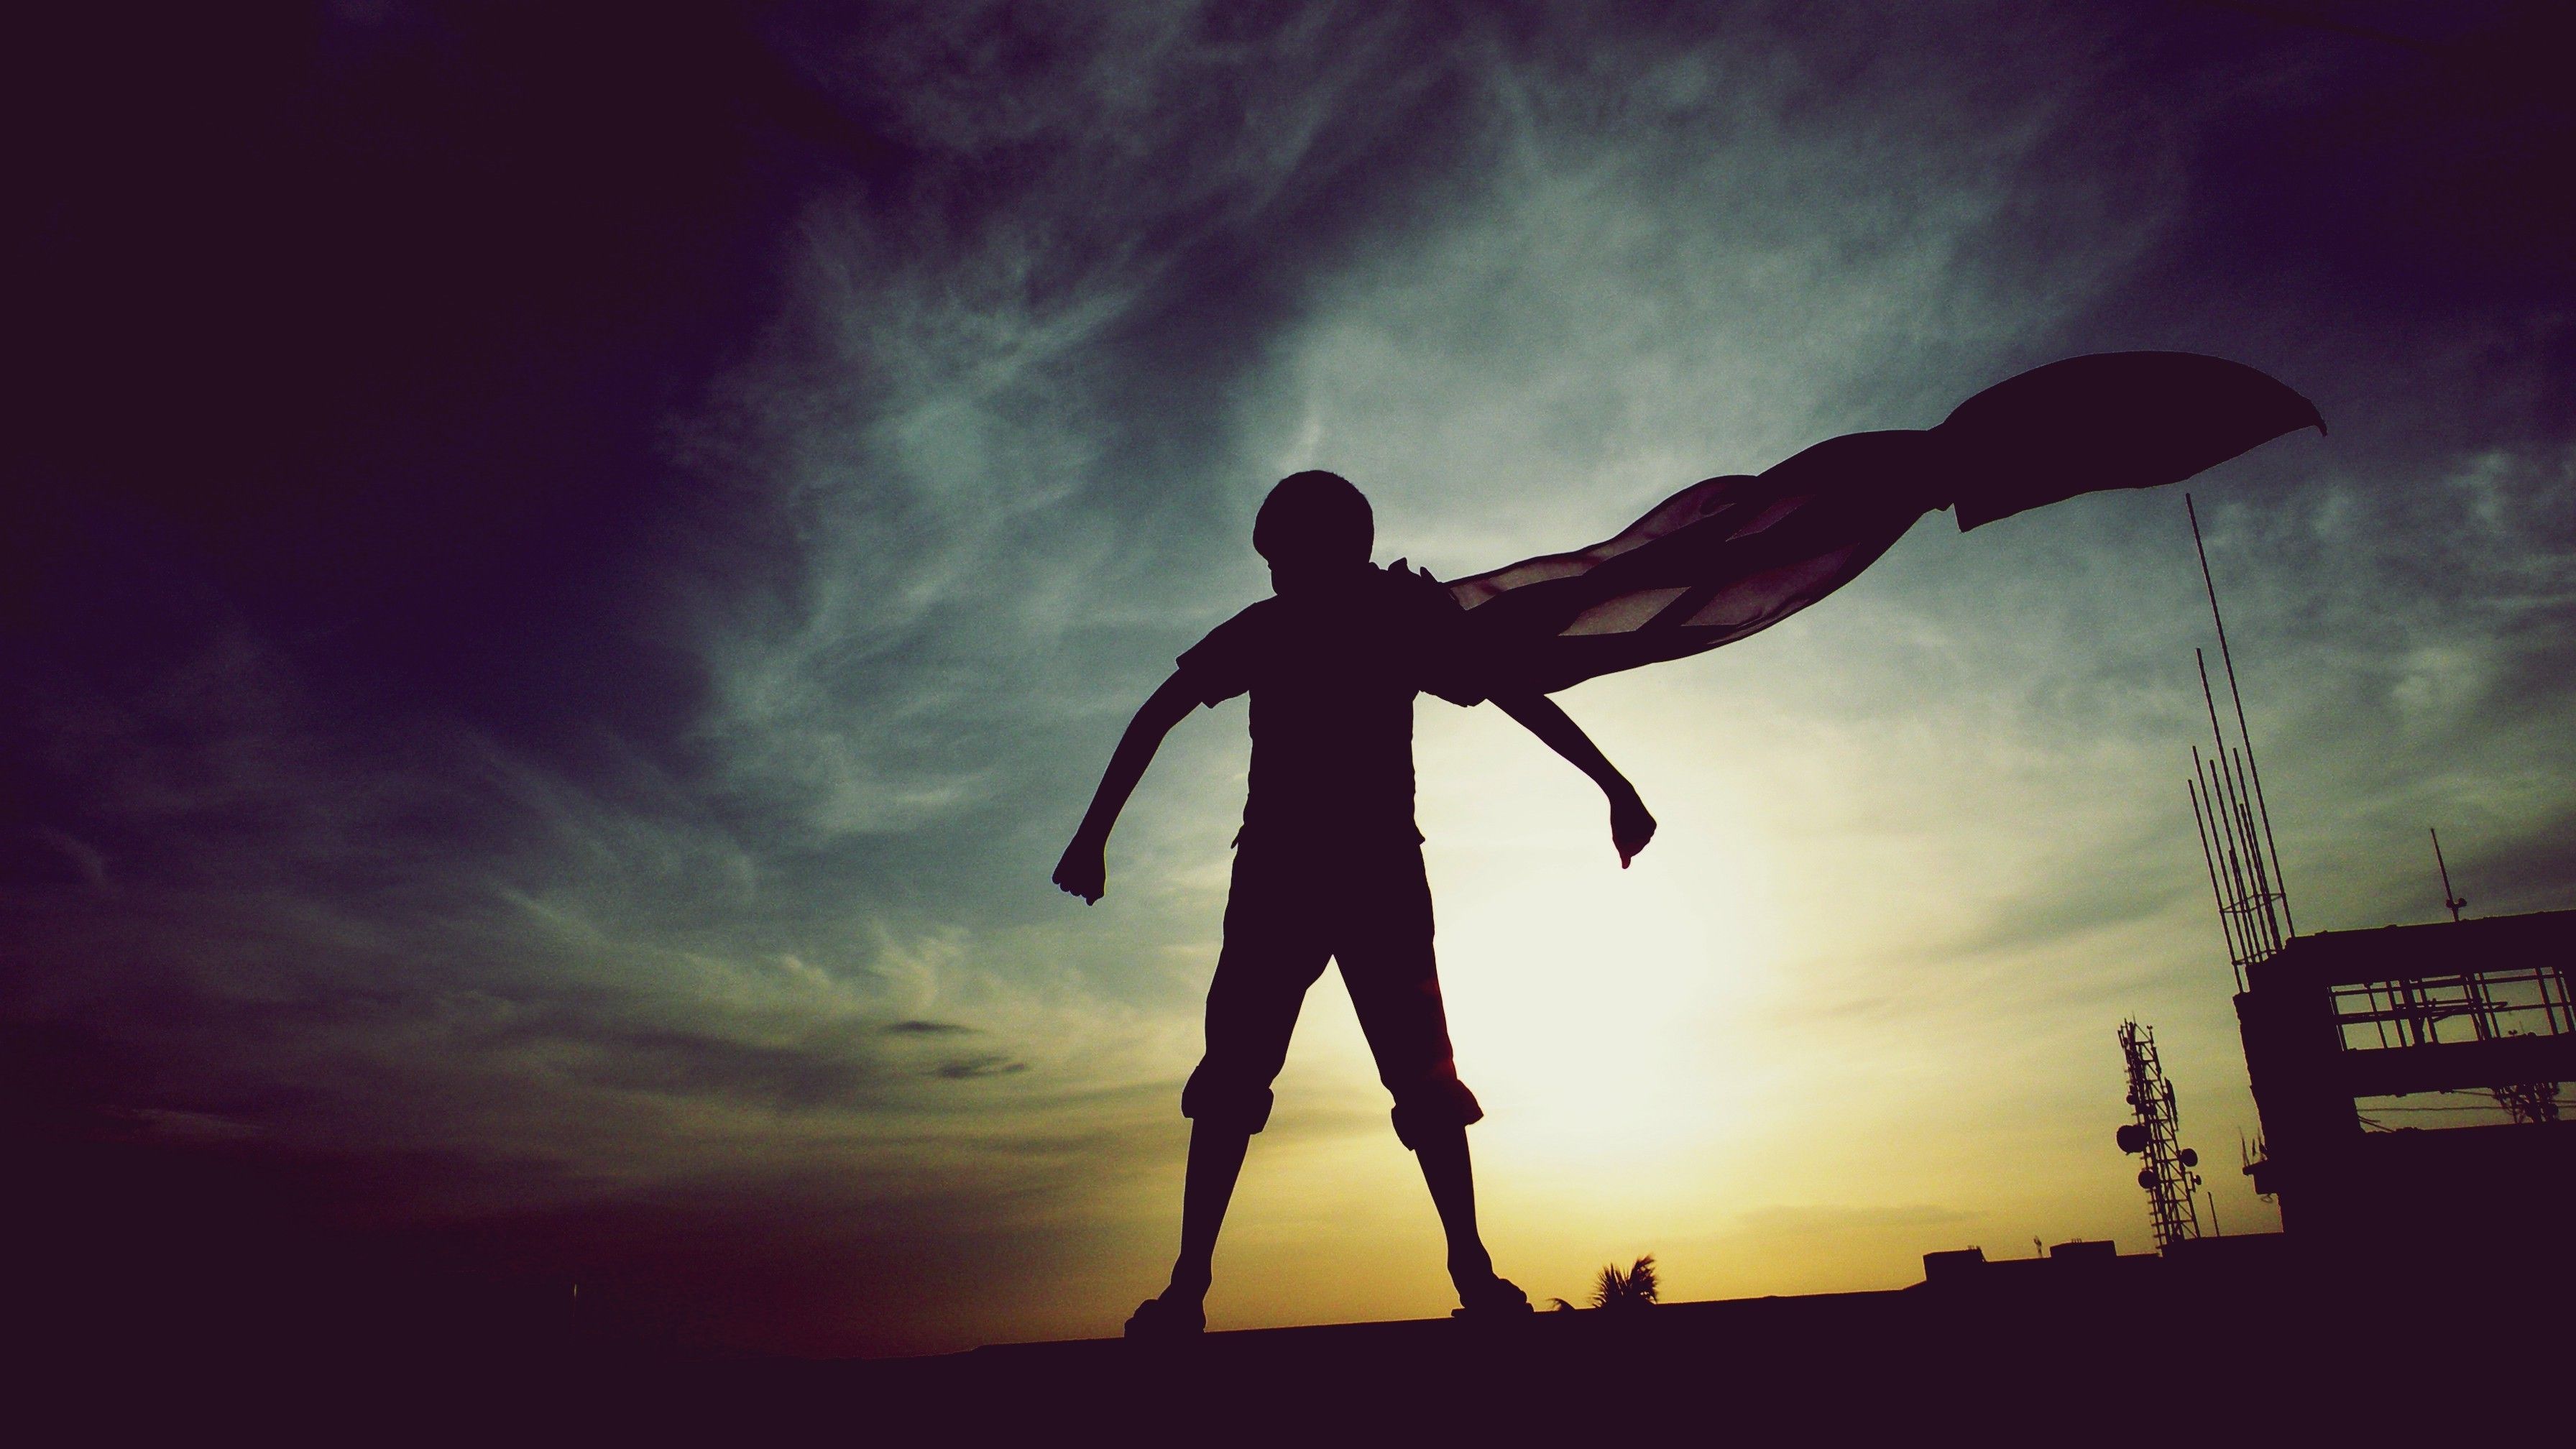 silhouette photography superman childhood dreams 500px